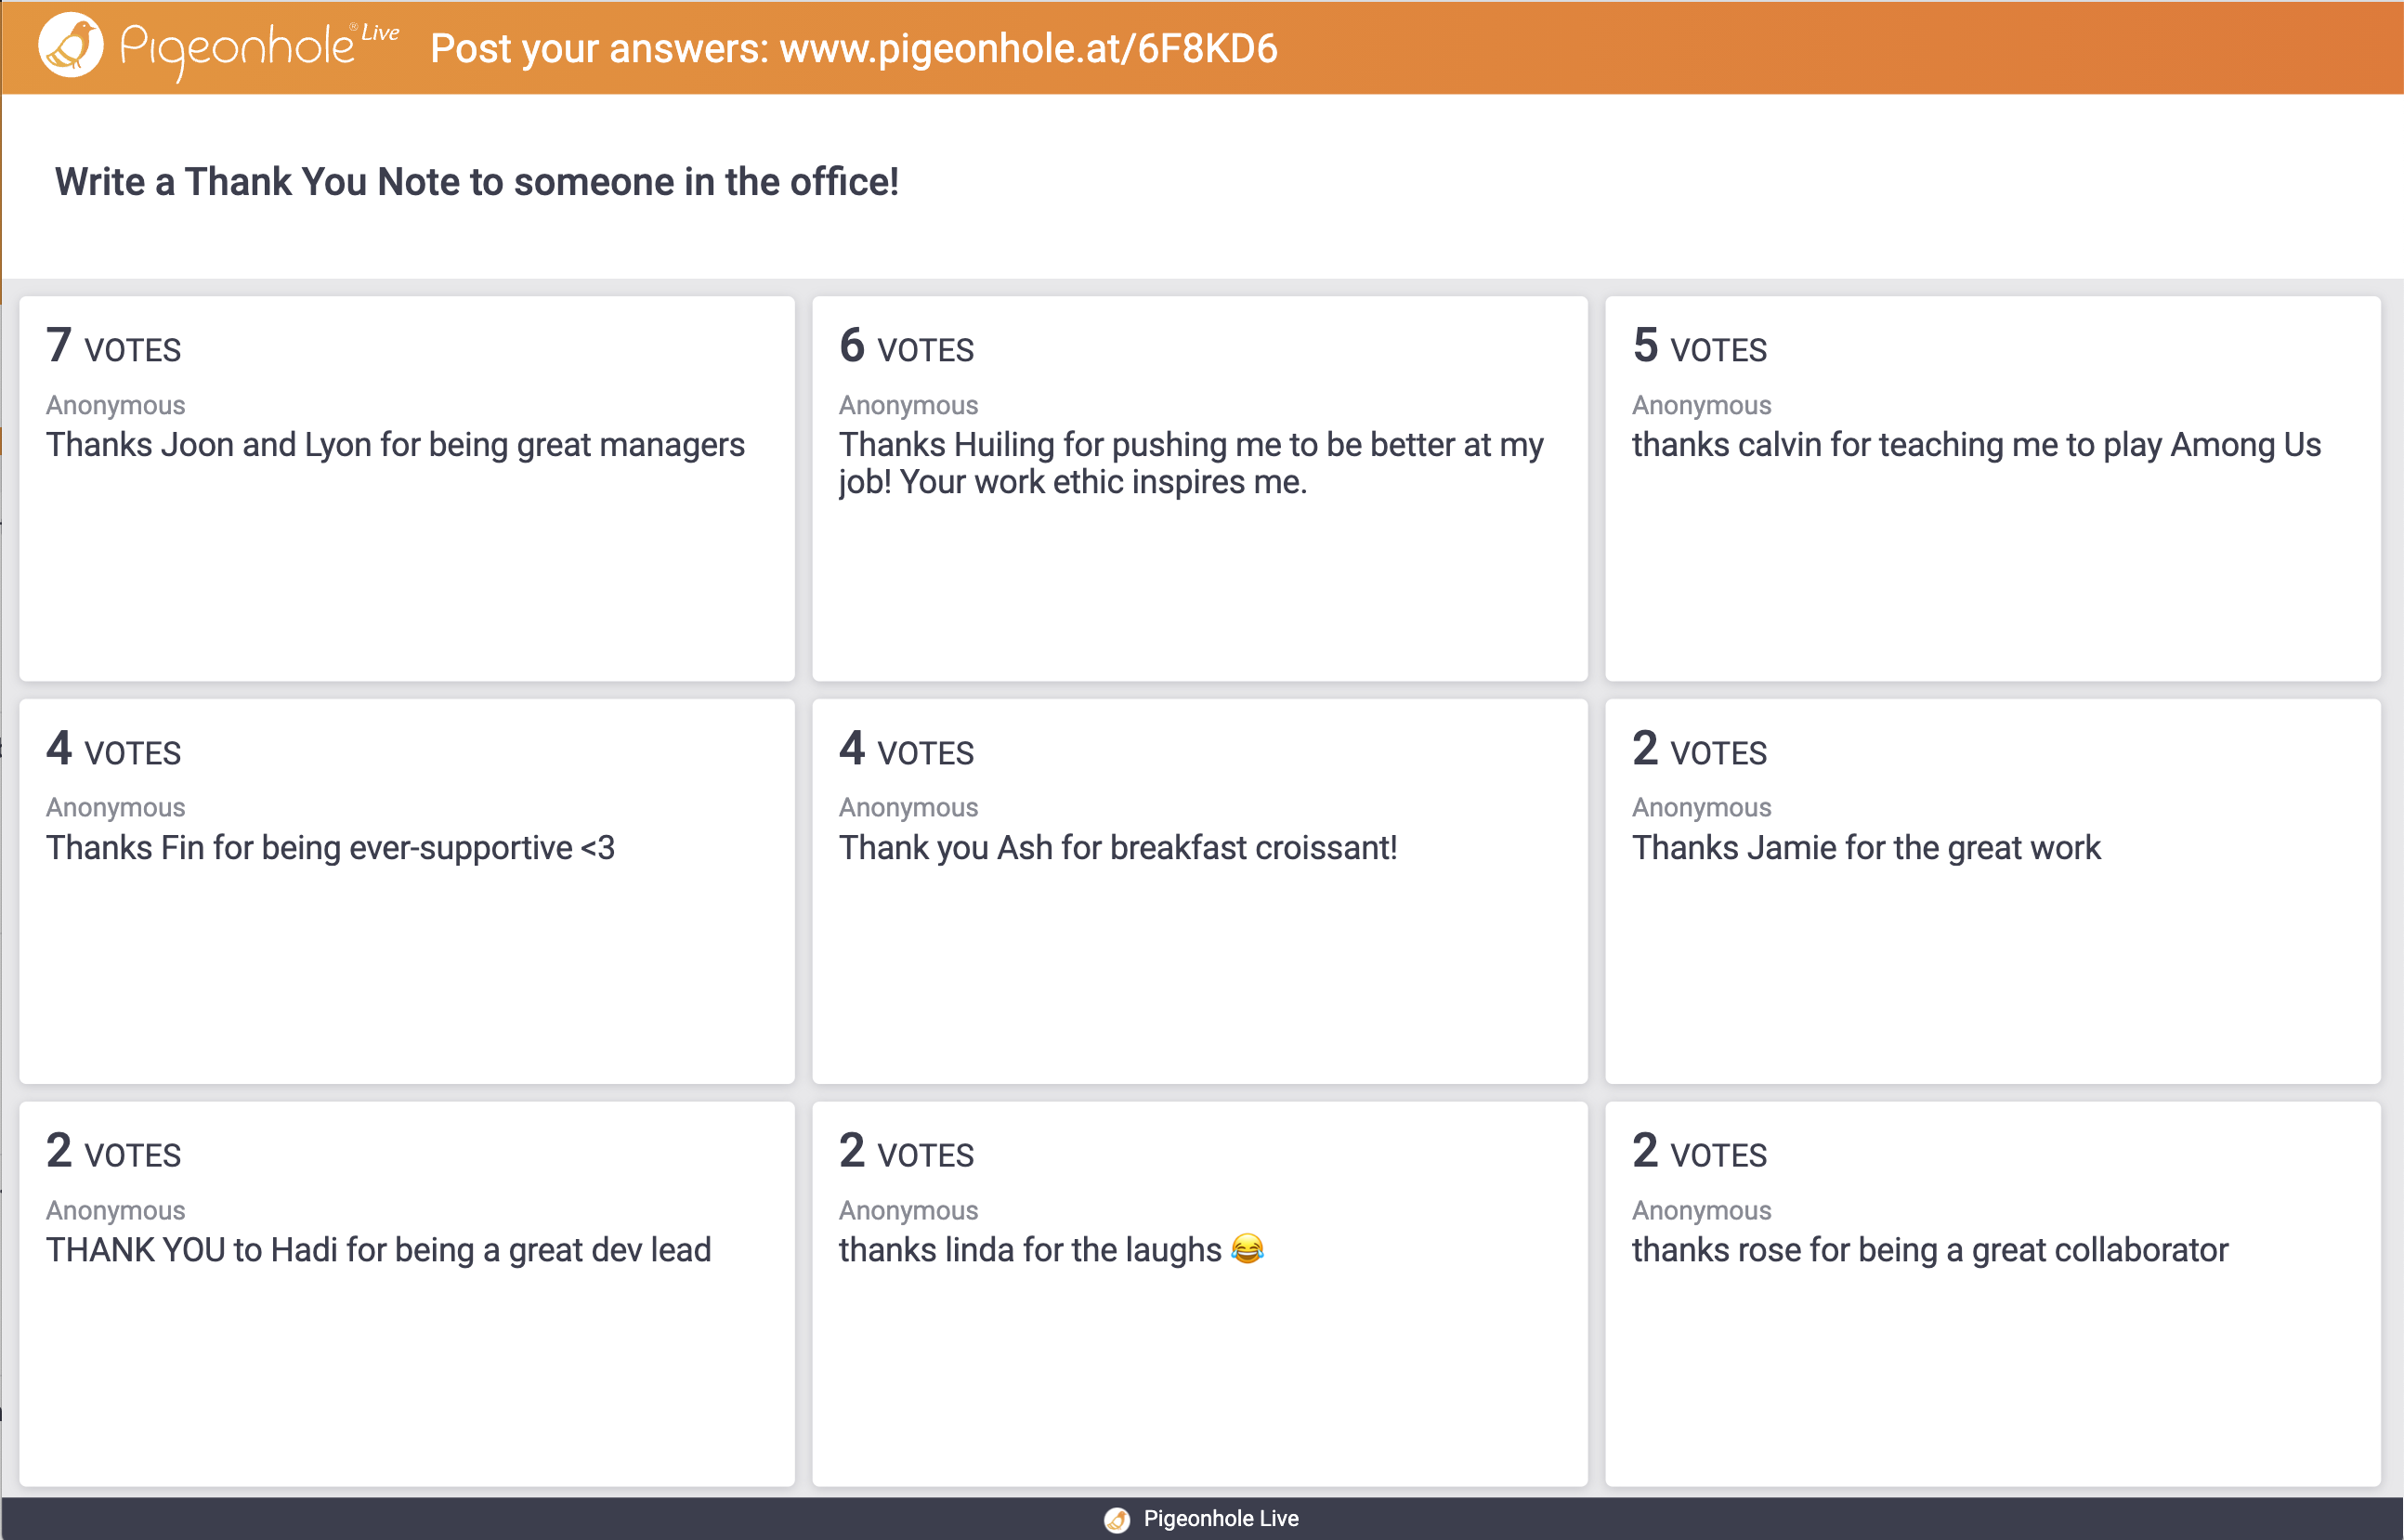 Pigeonhole Live's open-ended poll feature includes an 'express gratitude' question with anonymous entries